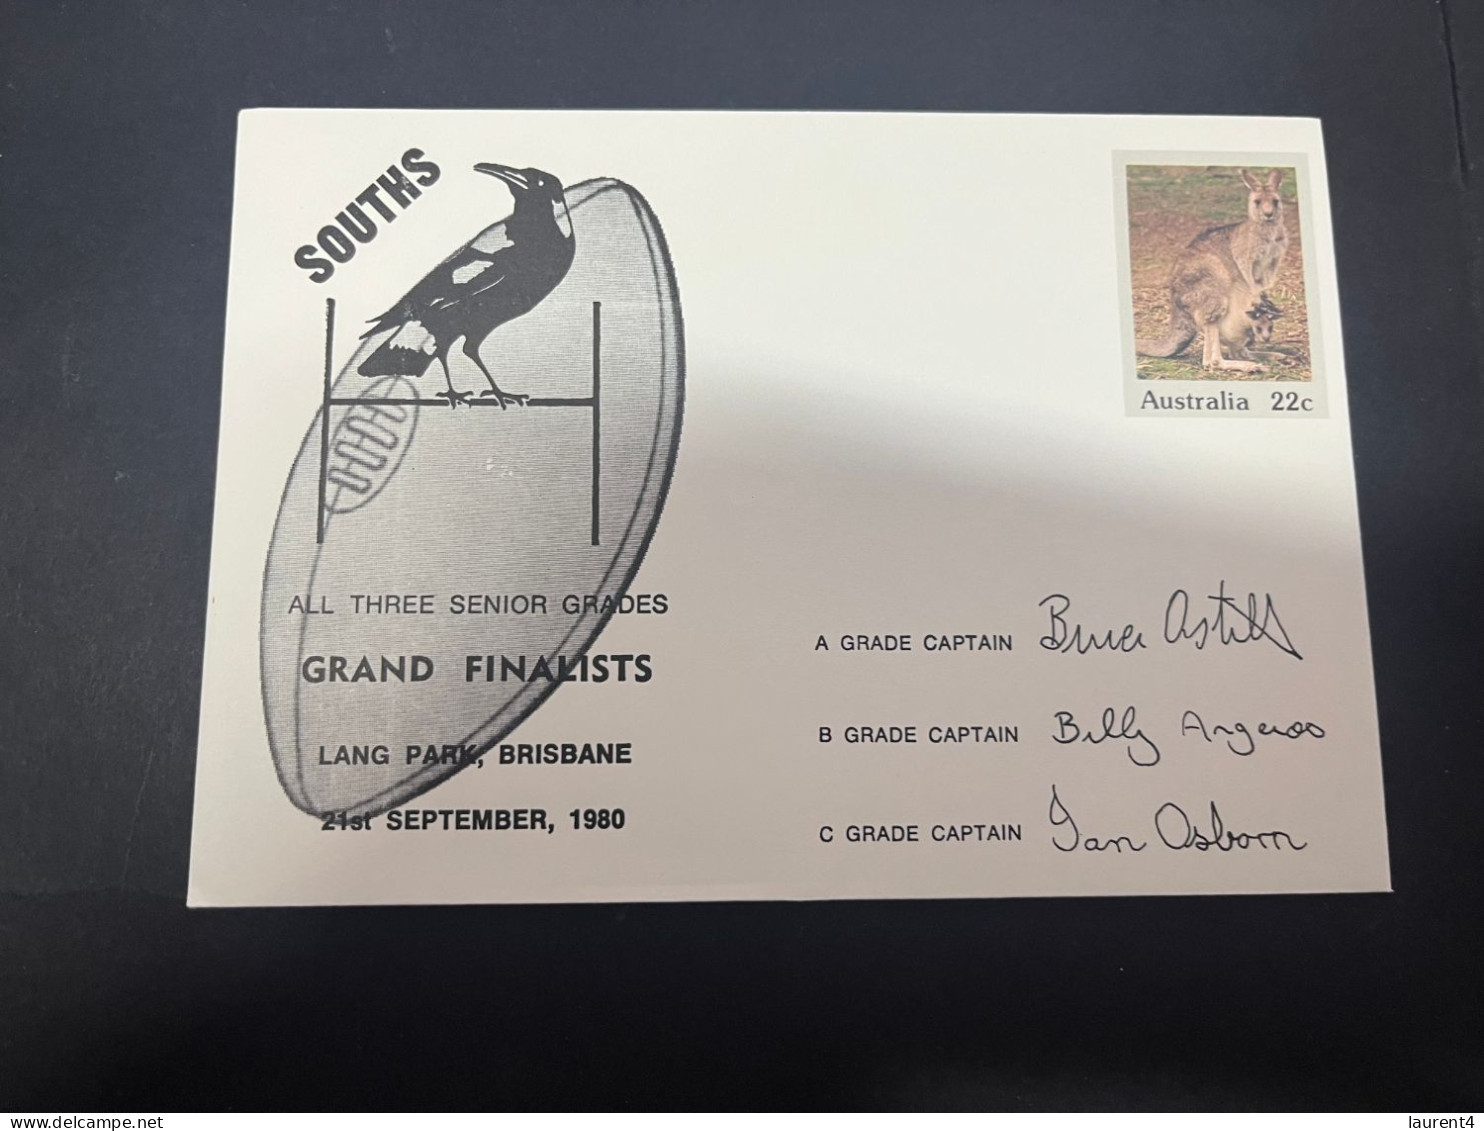 1-5-2023 (3 Z 39) Australia FDC (1 Covers) 1980 - OZ Football - South (magpies) Grand Finalists (signed - Kangaroo) - Ersttagsbelege (FDC)